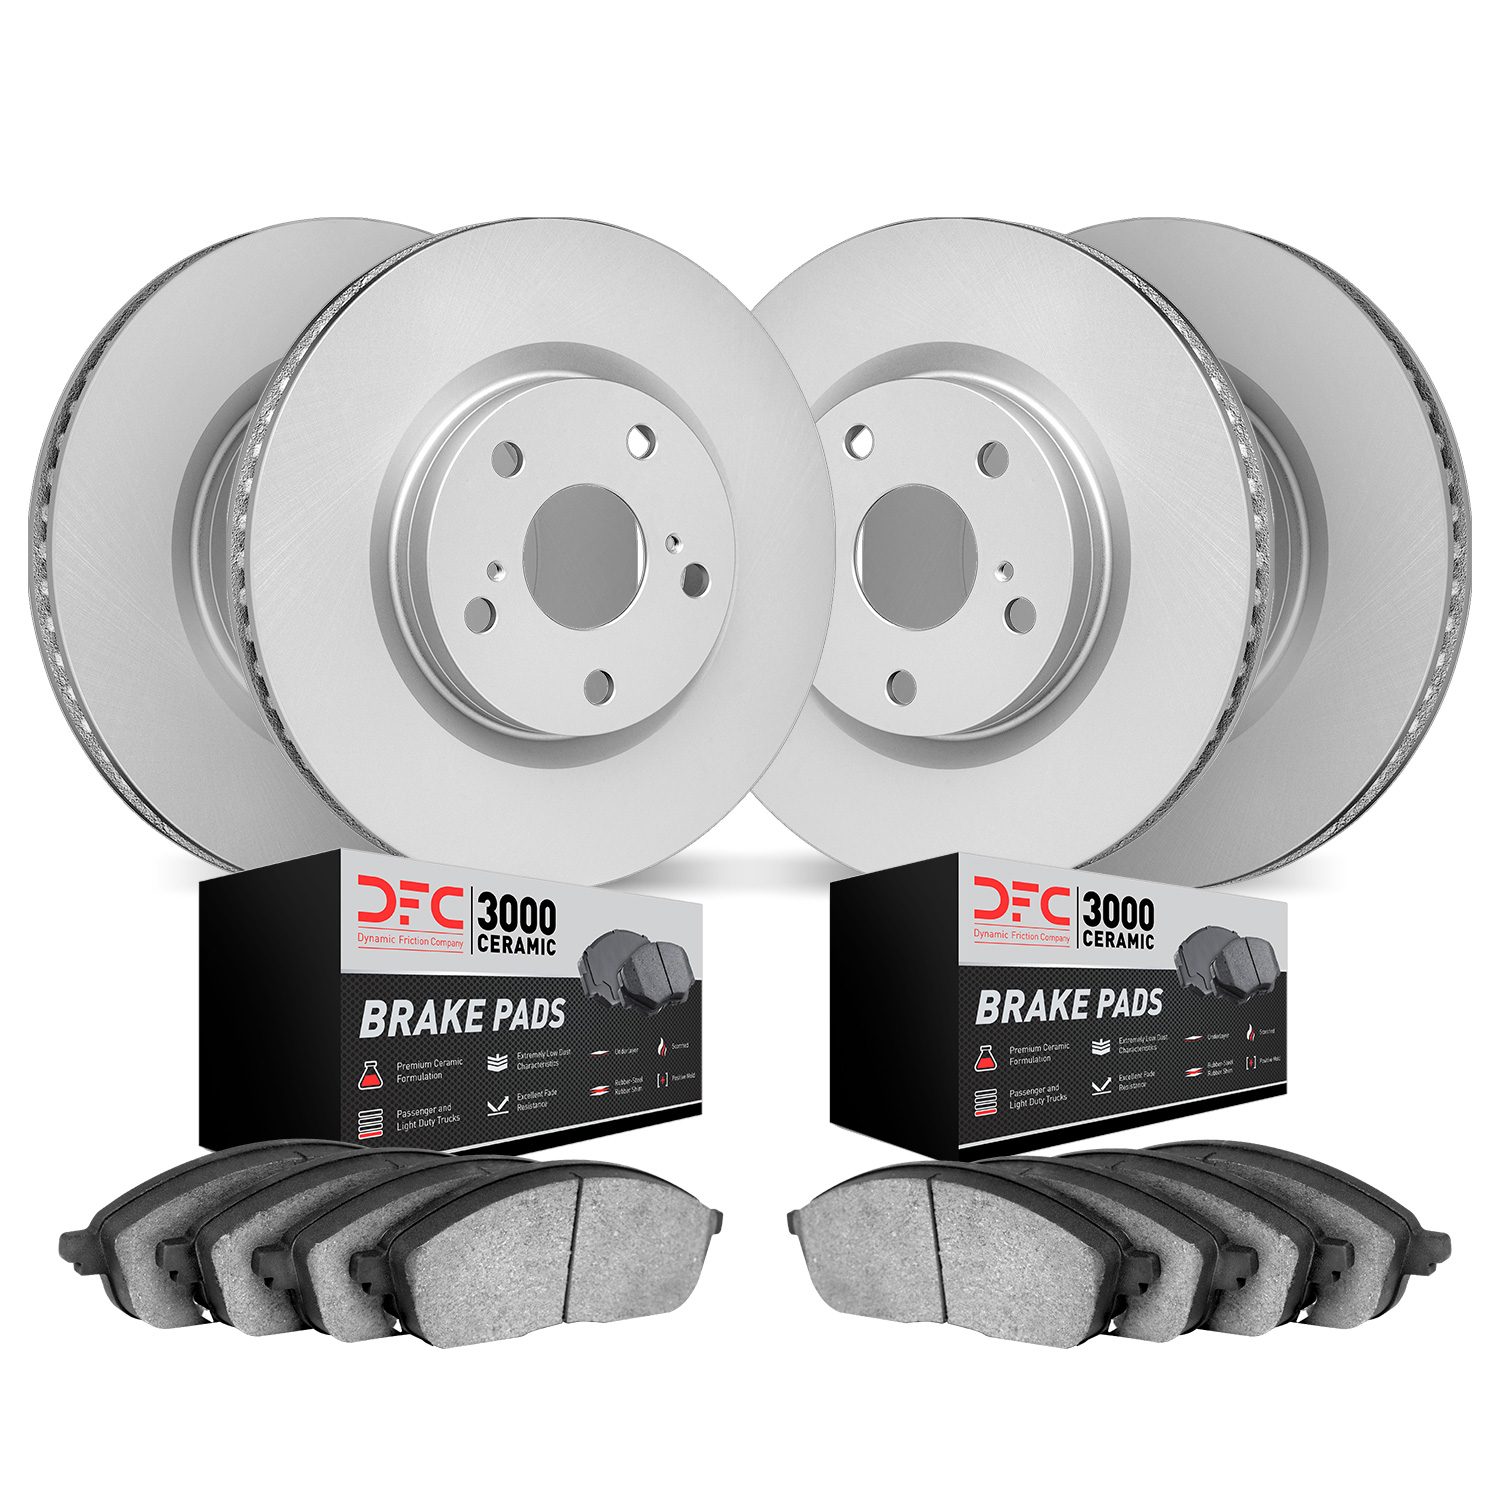 4304-67018 Geospec Brake Rotors with 3000-Series Ceramic Brake Pads Kit, 2011-2019 Infiniti/Nissan, Position: Front and Rear